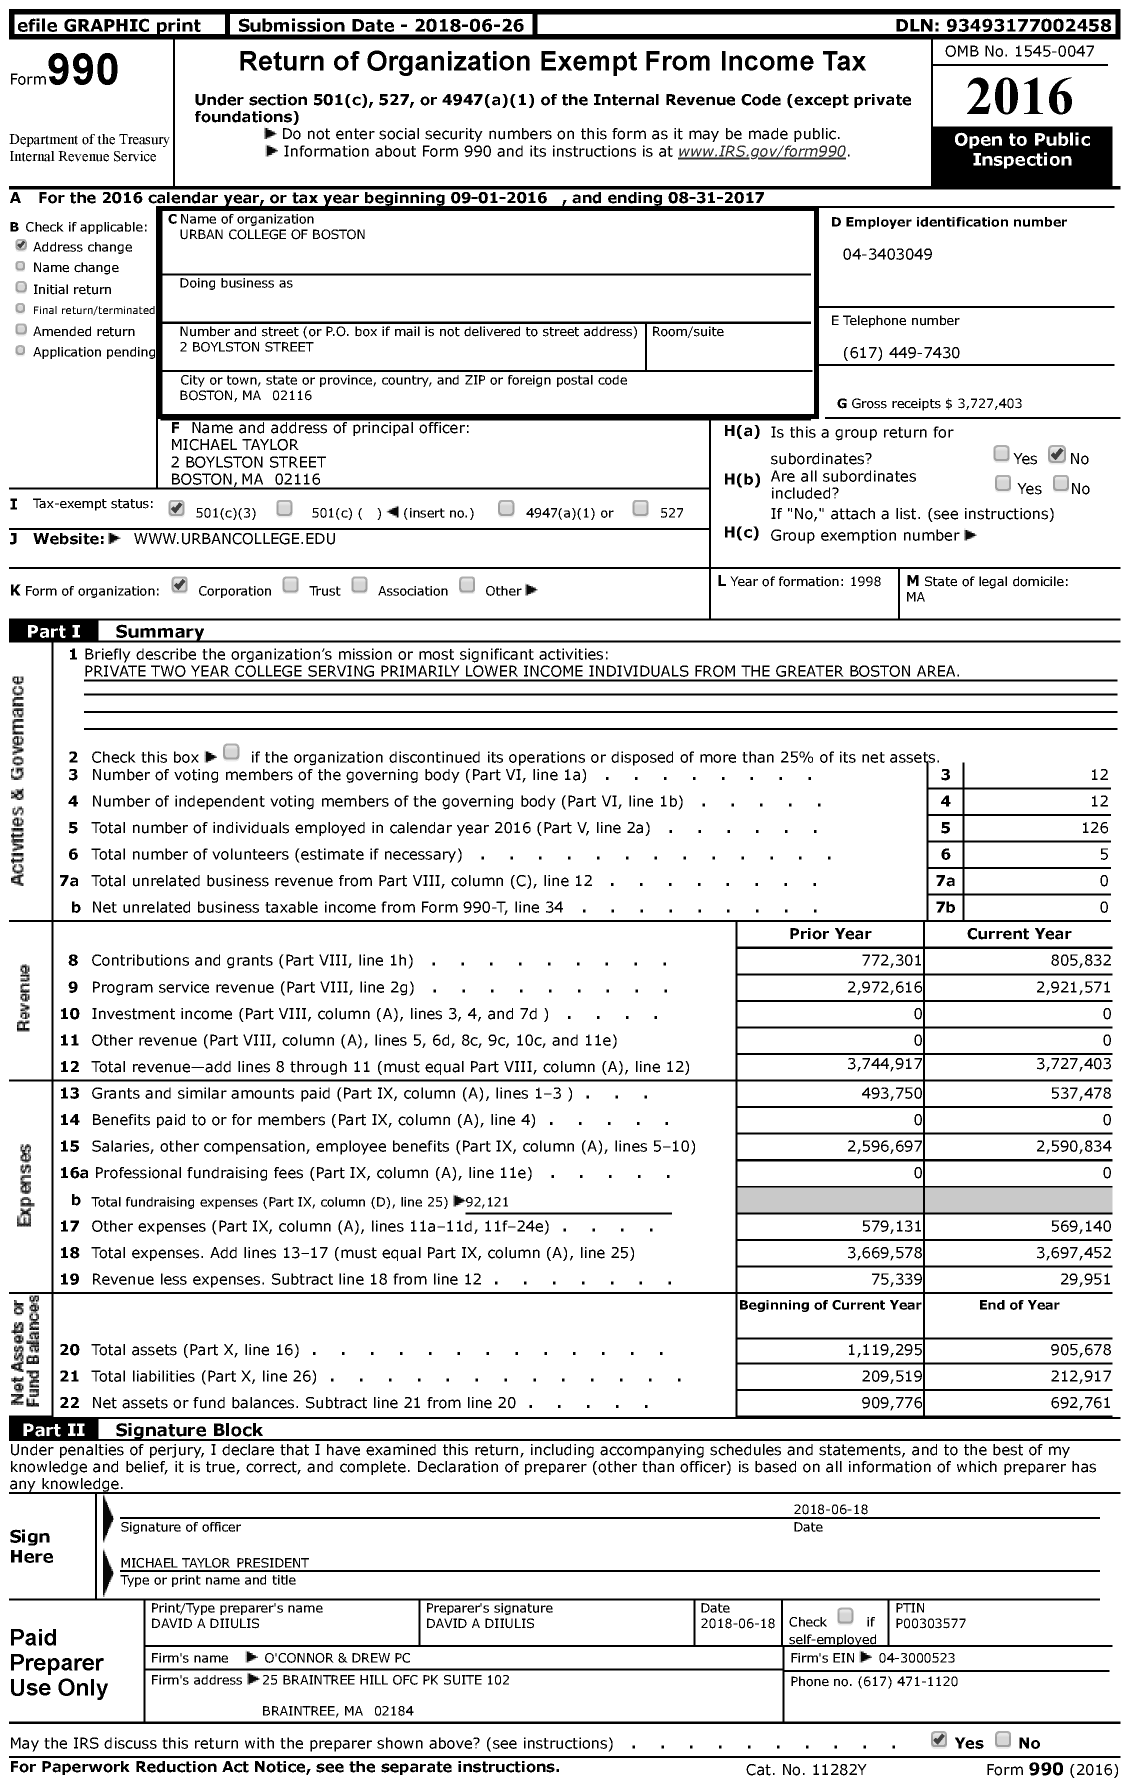 Image of first page of 2016 Form 990 for Urban College of Boston (UCB)